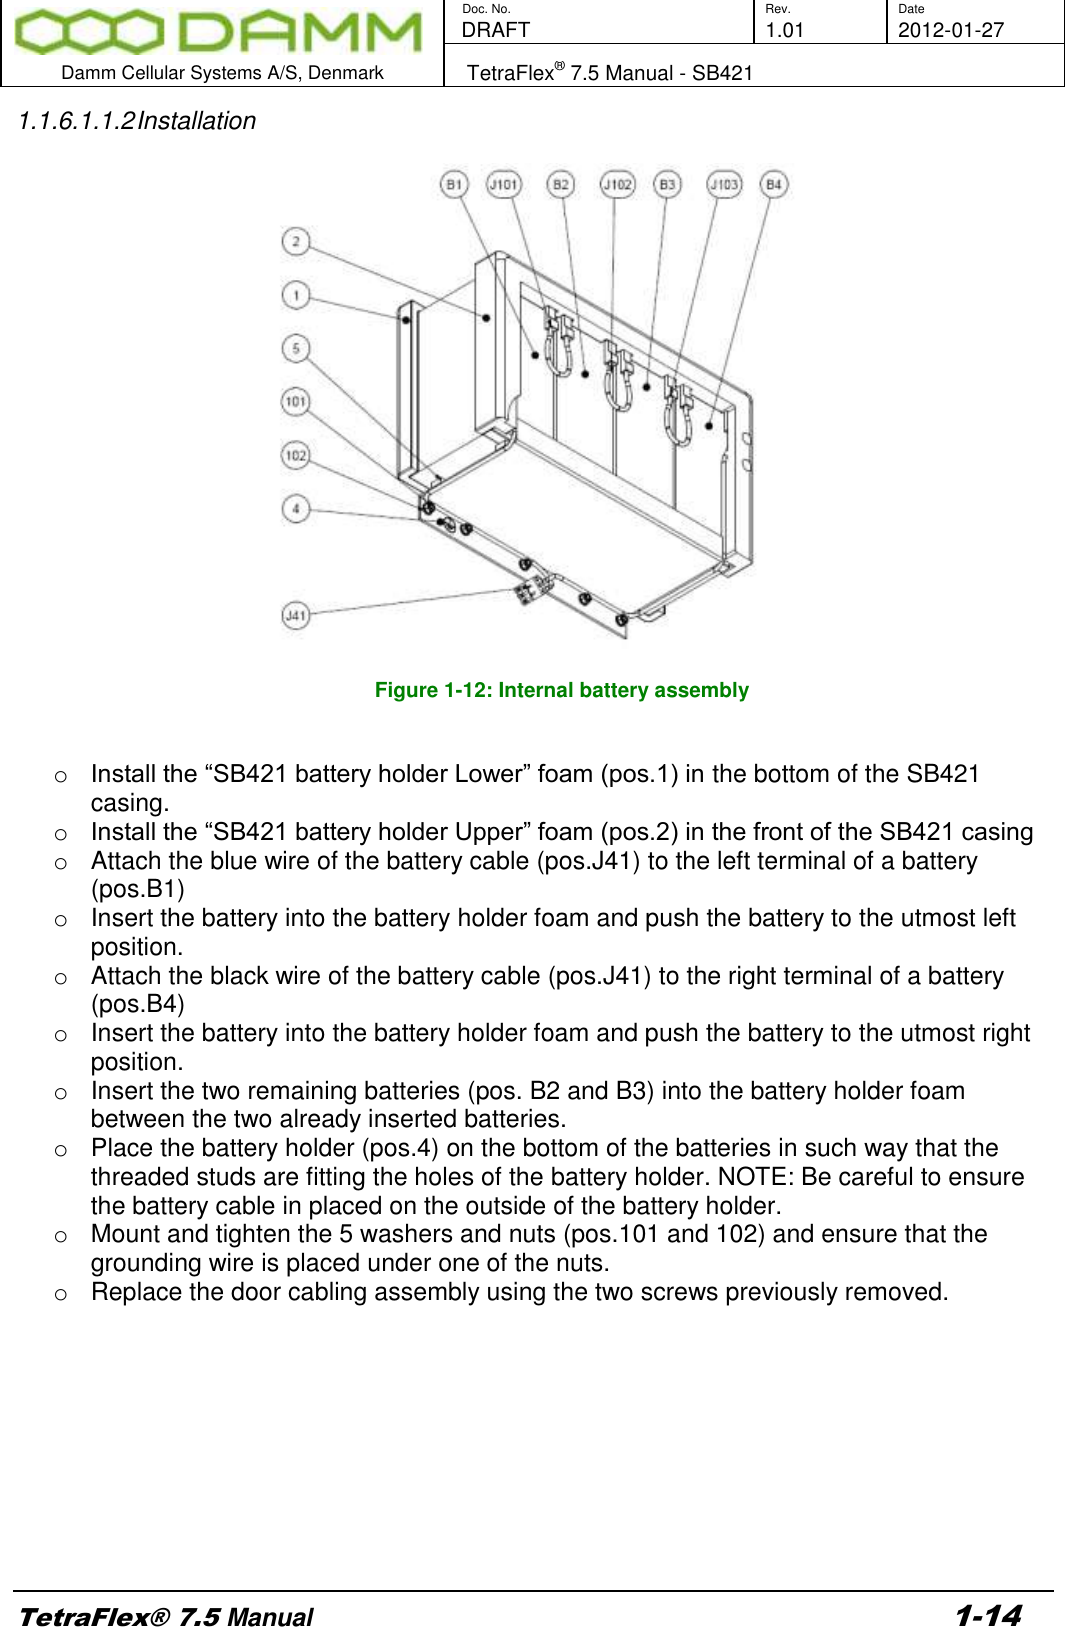        Doc. No. Rev. Date    DRAFT  1.01 2012-01-27  Damm Cellular Systems A/S, Denmark   TetraFlex® 7.5 Manual - SB421  TetraFlex® 7.5 Manual 1-14 1.1.6.1.1.2 Installation    Figure 1-12: Internal battery assembly   o Install the “SB421 battery holder Lower” foam (pos.1) in the bottom of the SB421 casing. o Install the “SB421 battery holder Upper” foam (pos.2) in the front of the SB421 casing  o  Attach the blue wire of the battery cable (pos.J41) to the left terminal of a battery (pos.B1) o  Insert the battery into the battery holder foam and push the battery to the utmost left position. o  Attach the black wire of the battery cable (pos.J41) to the right terminal of a battery (pos.B4) o  Insert the battery into the battery holder foam and push the battery to the utmost right position. o  Insert the two remaining batteries (pos. B2 and B3) into the battery holder foam between the two already inserted batteries. o  Place the battery holder (pos.4) on the bottom of the batteries in such way that the threaded studs are fitting the holes of the battery holder. NOTE: Be careful to ensure the battery cable in placed on the outside of the battery holder. o  Mount and tighten the 5 washers and nuts (pos.101 and 102) and ensure that the grounding wire is placed under one of the nuts.  o  Replace the door cabling assembly using the two screws previously removed.          